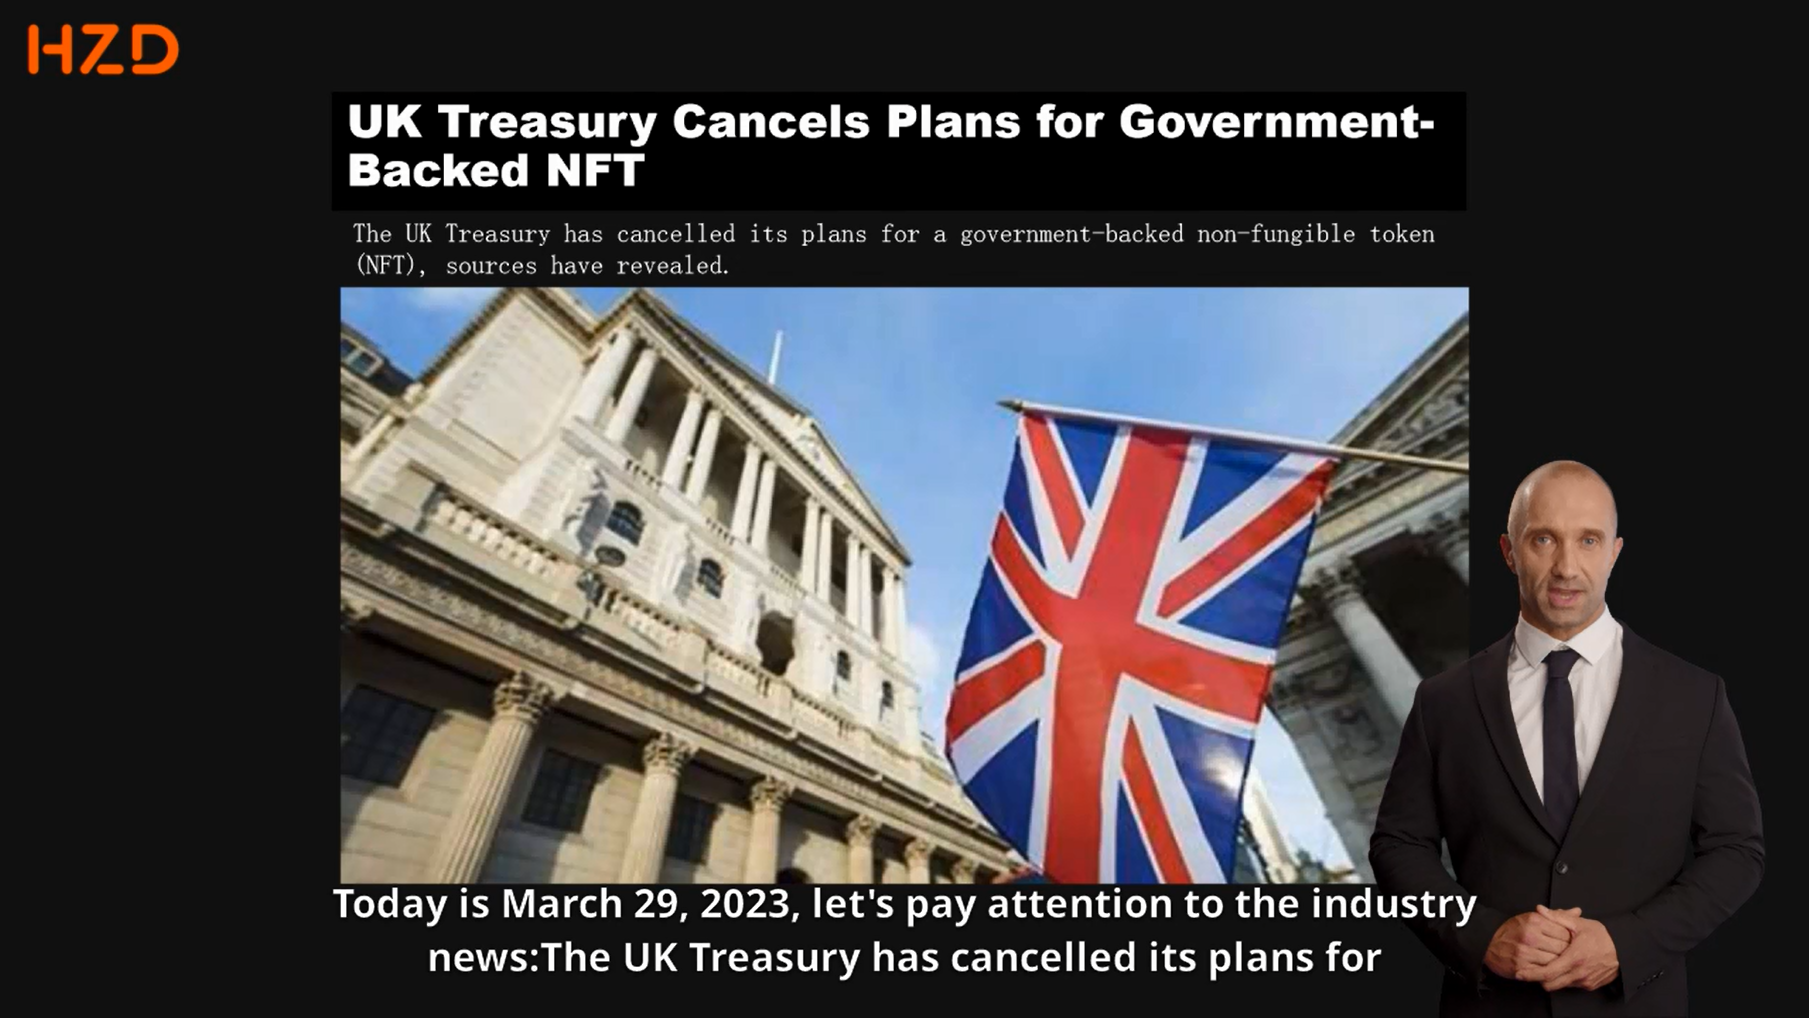 UK Treasury Cancels Plans for Government-Backed NFT